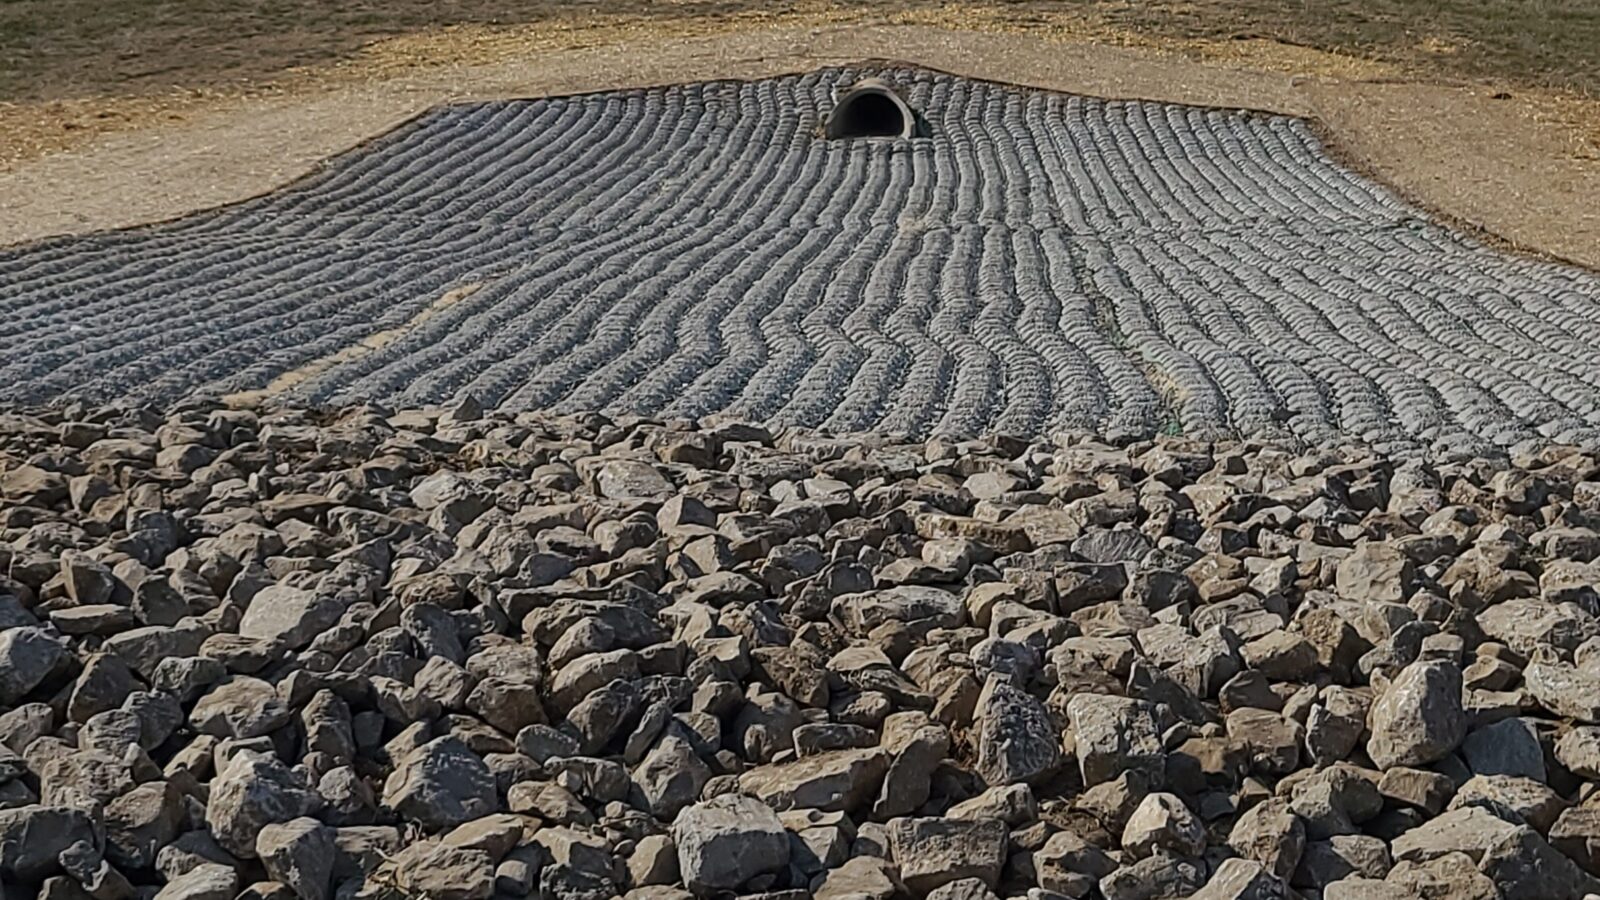 A cobblestone spillway constructed by Ladd Scape with rocks at the bottom